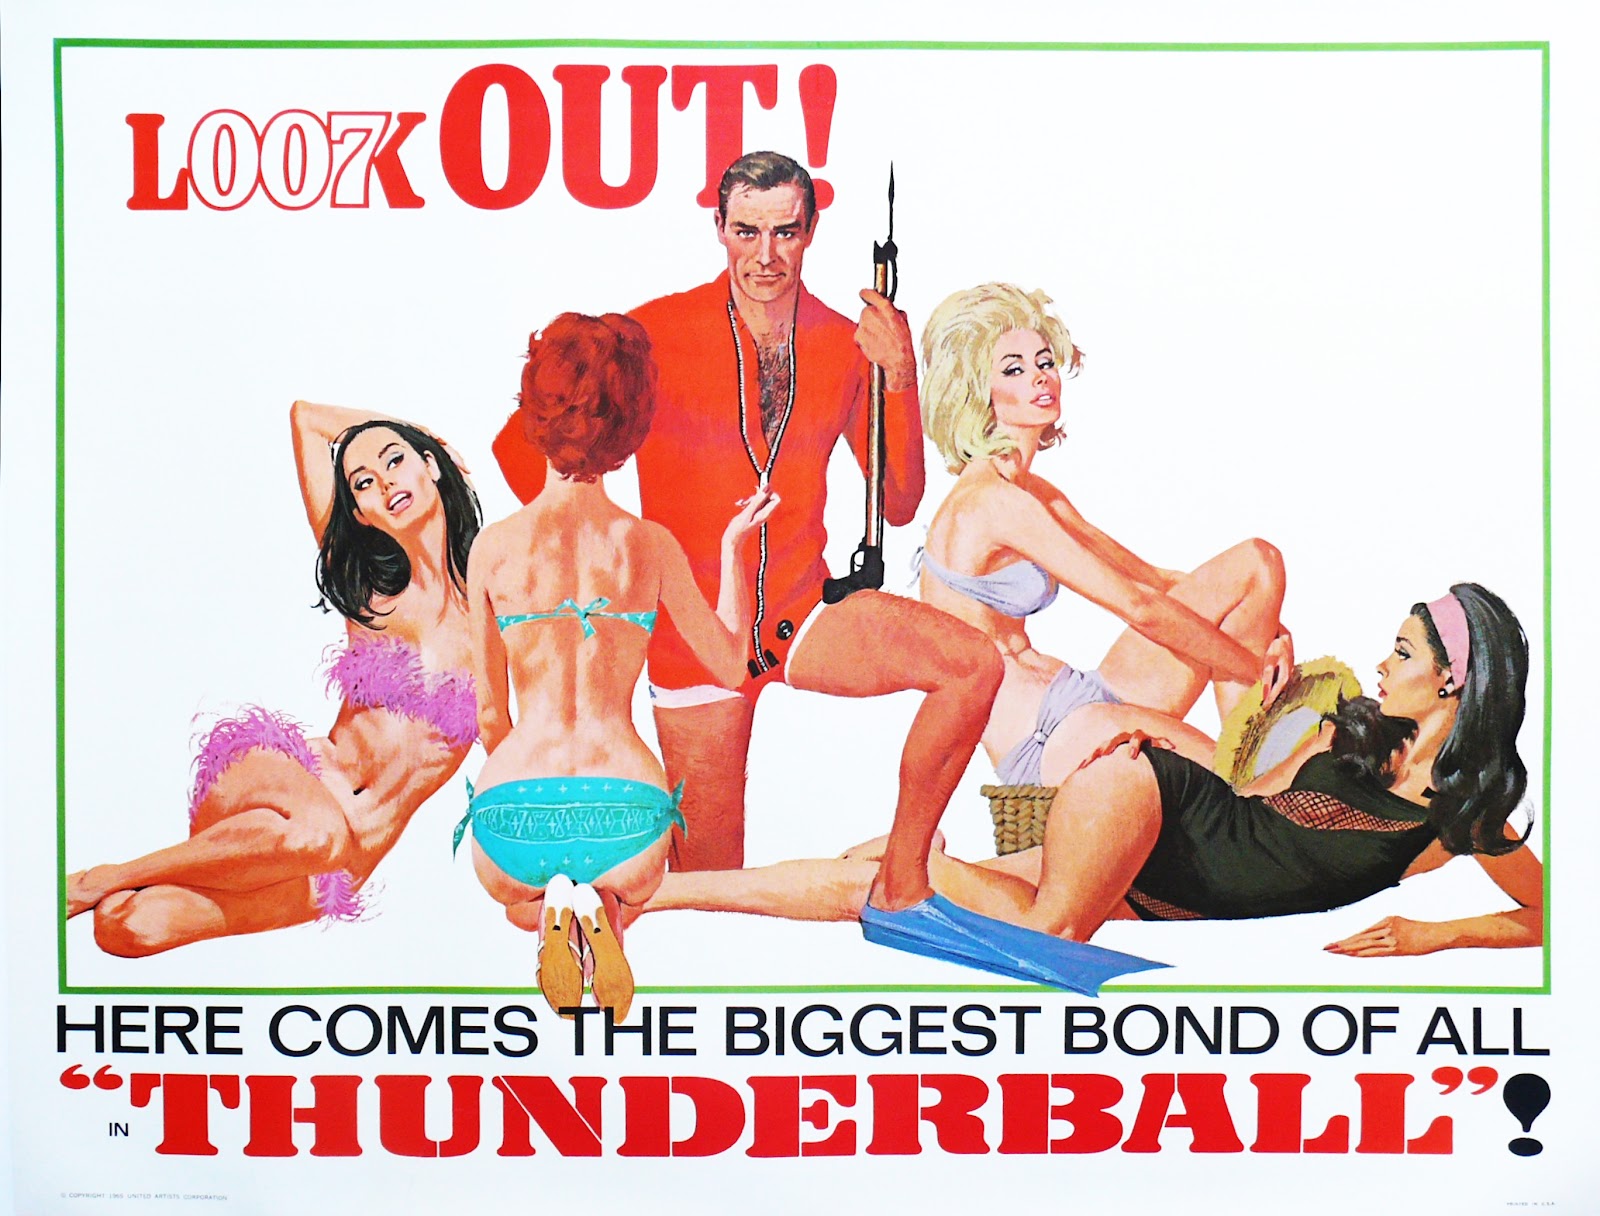 Images of Thunderball | 1600x1216